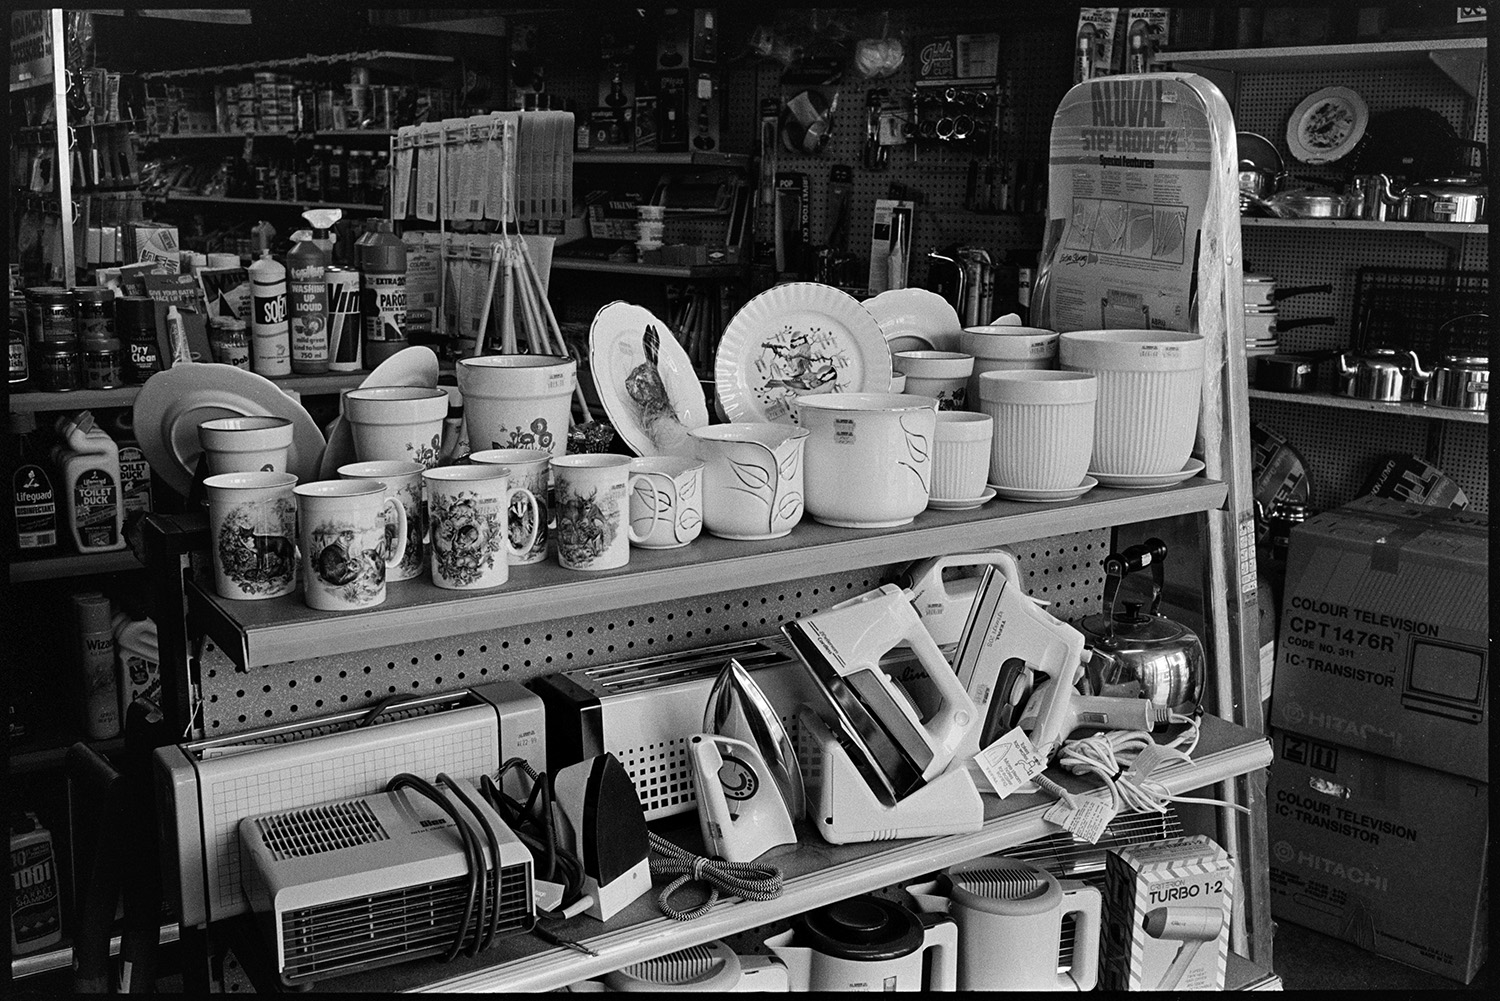 Interior of ironmongers shop. Assistant serving customer. Goods on shelves. Hardware.<br />
[Mugs, plant pots and electrical goods, including irons and kettles, displayed on shelves in A E Kingdon, ironmongers shop in Fore Street, Chulmleigh.]